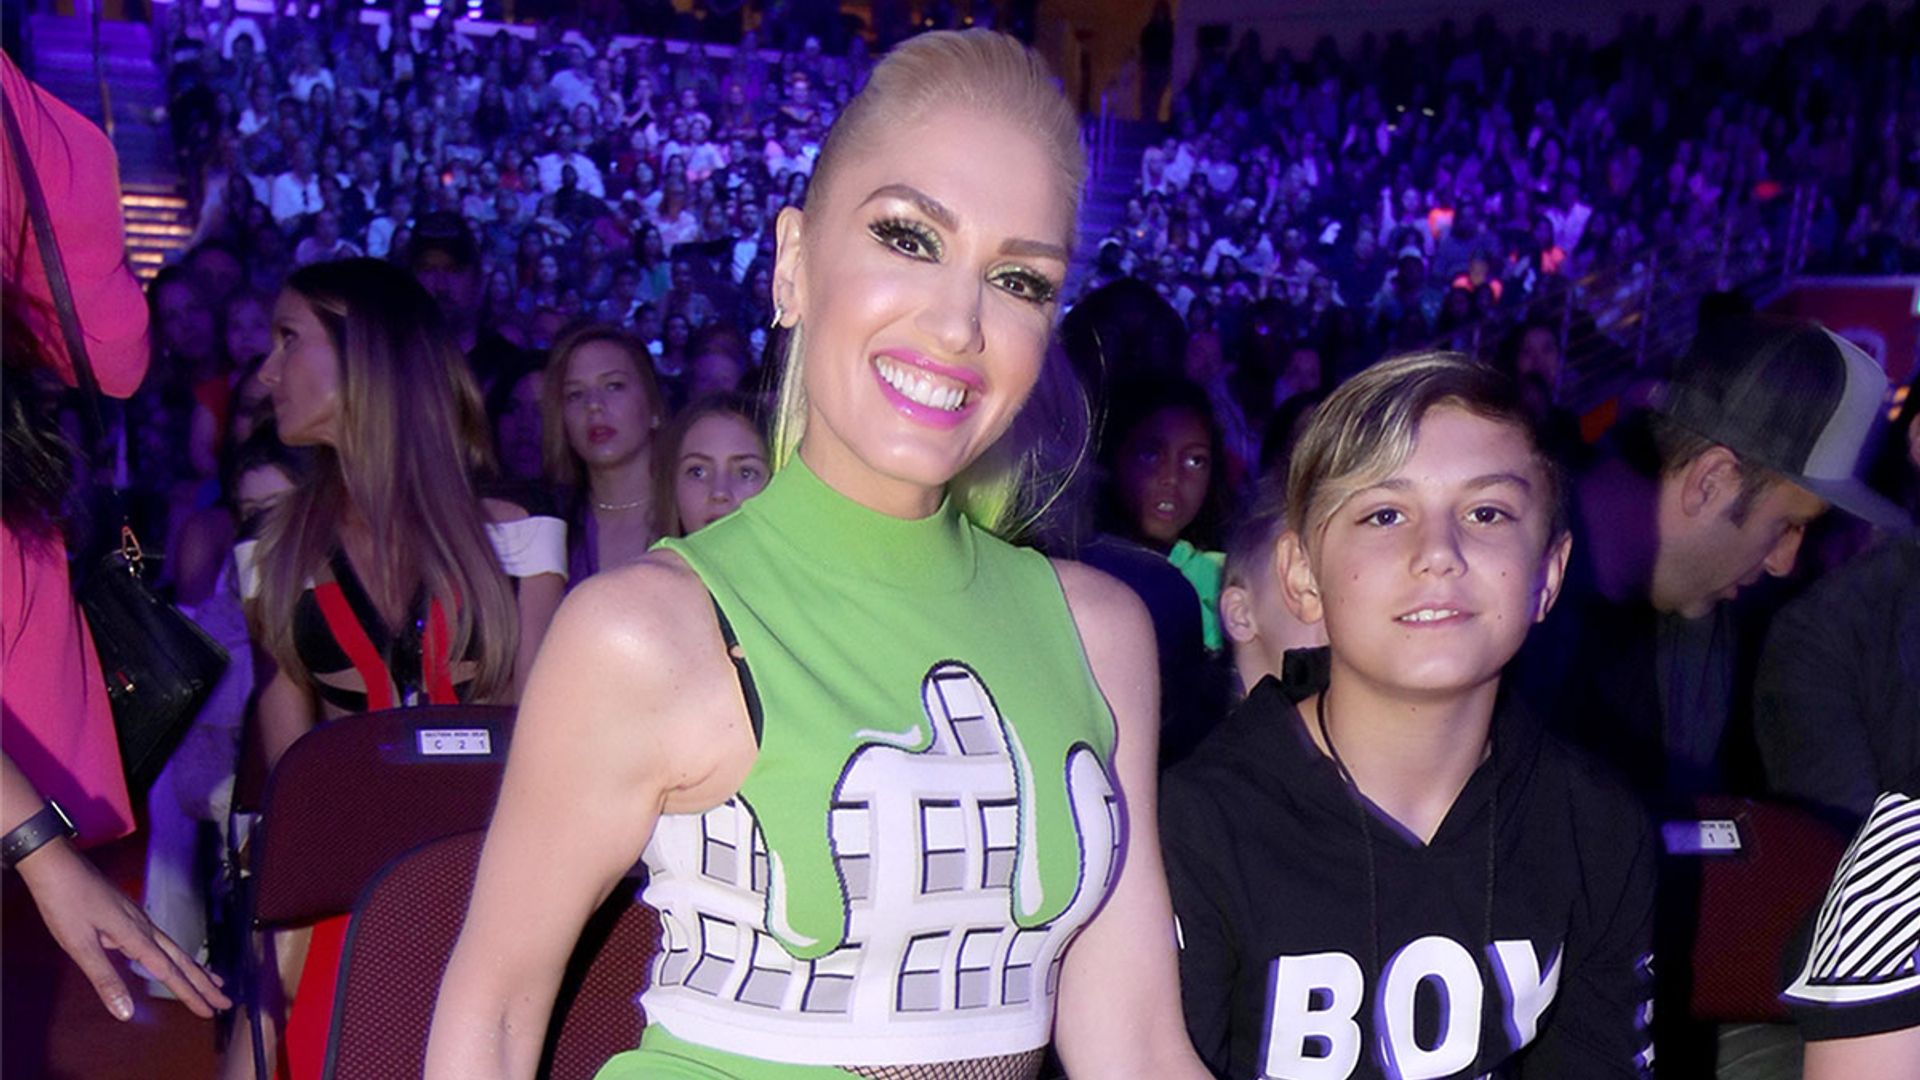 gwen-stefani-and-son-kingston-at-event-wearing-green